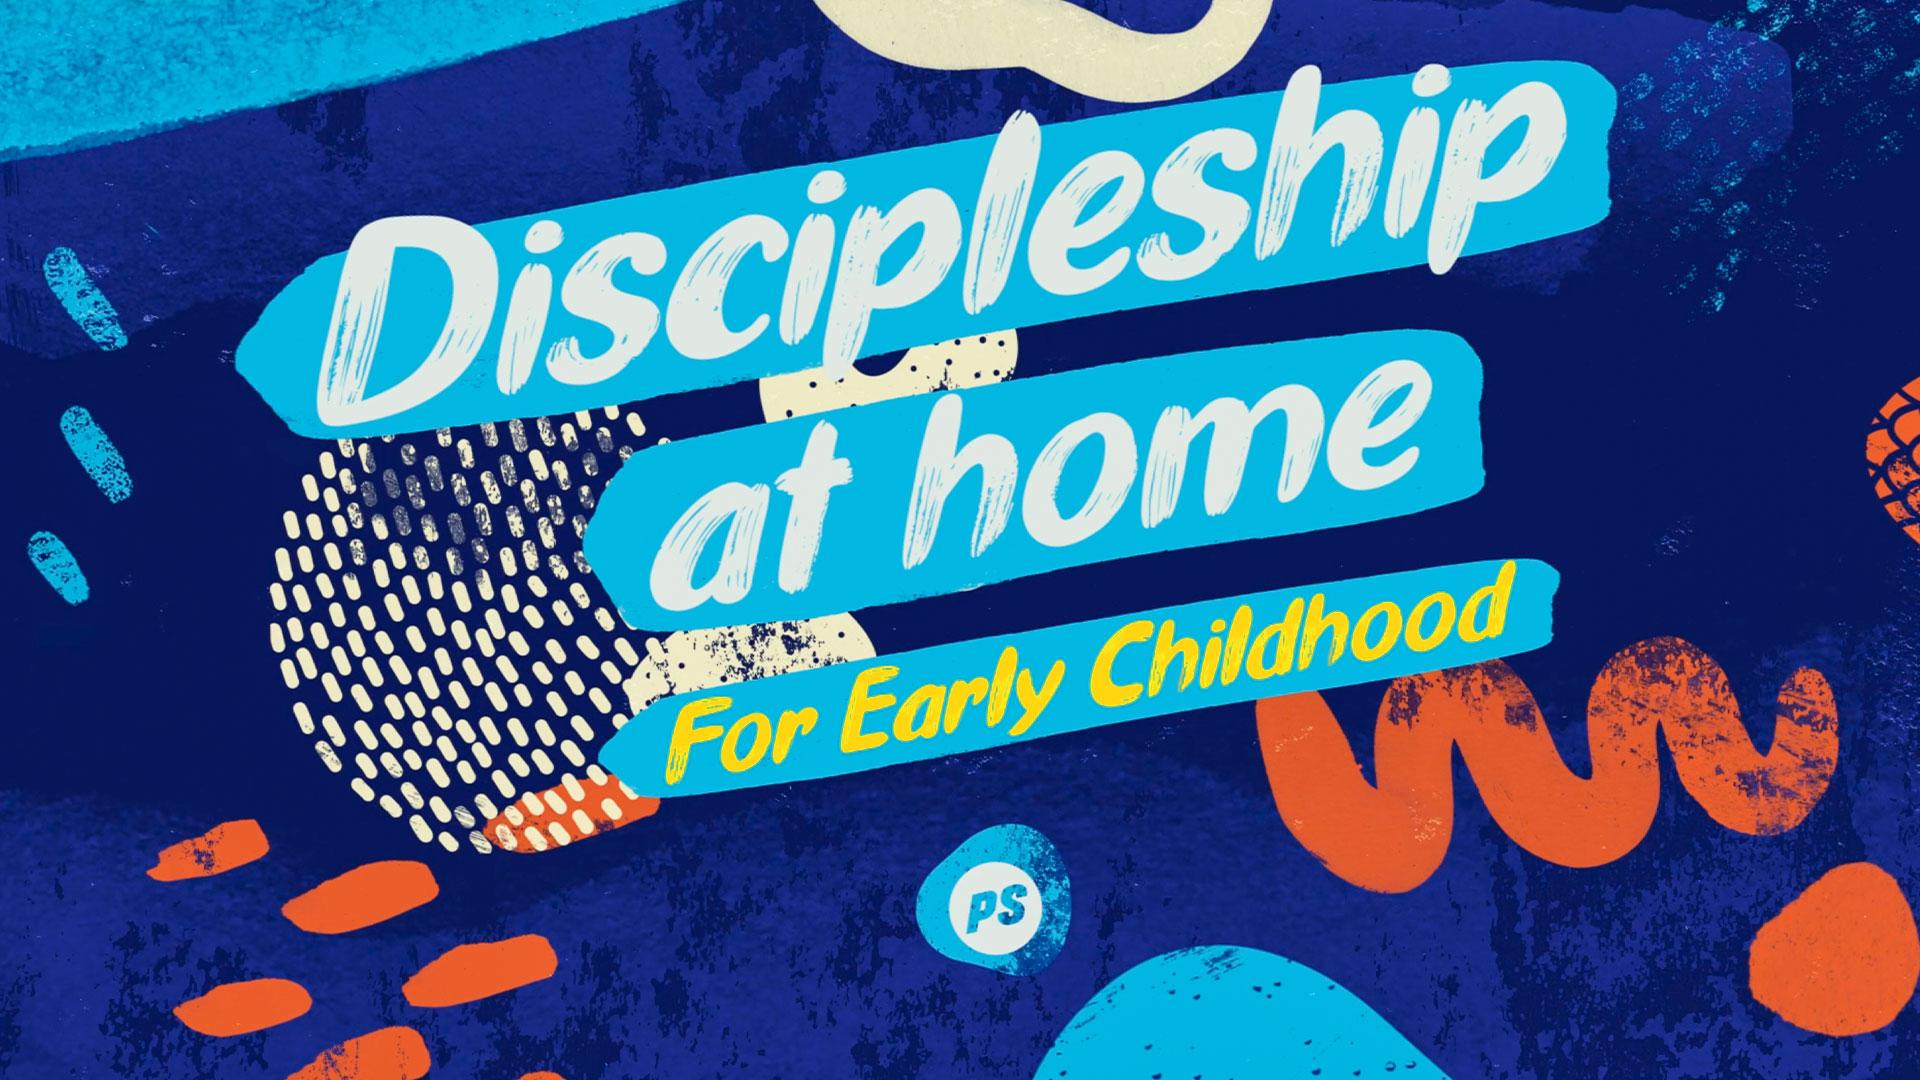 Featured image for “Discipleship at home: For “Early Childhood””